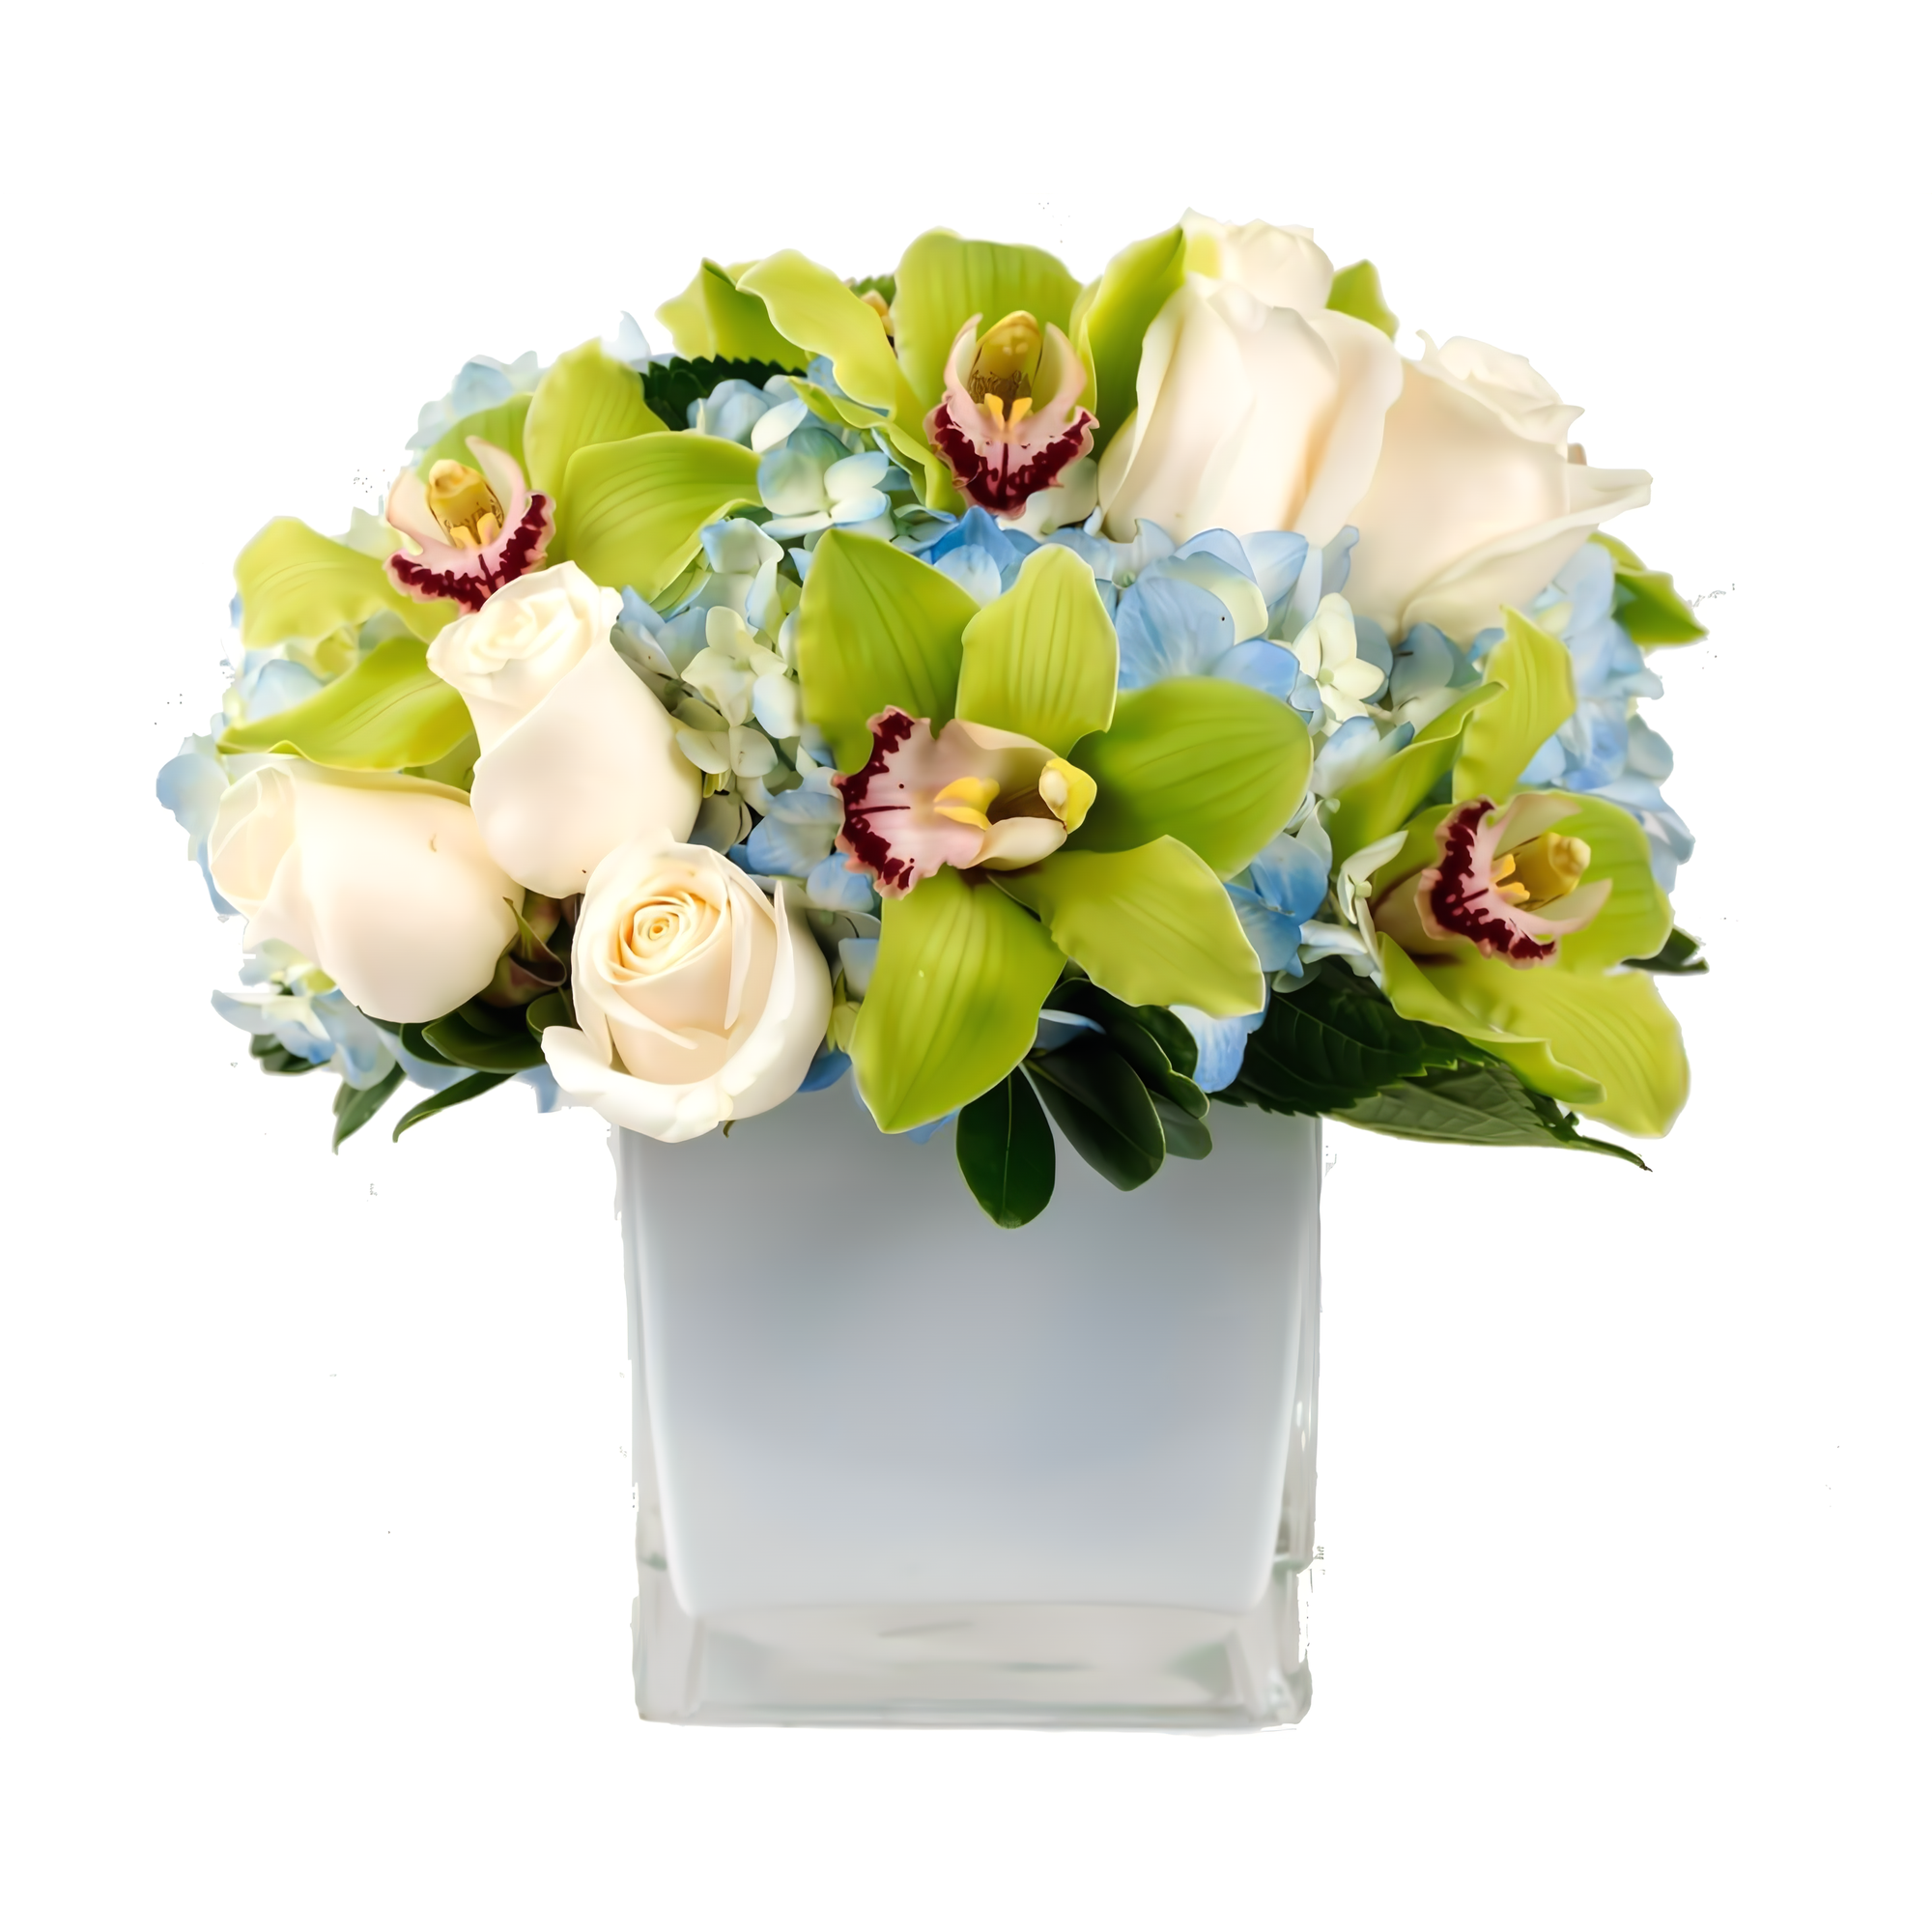 Manhattan Flower Delivery - Lexington Luxury - Occasions > Anniversary